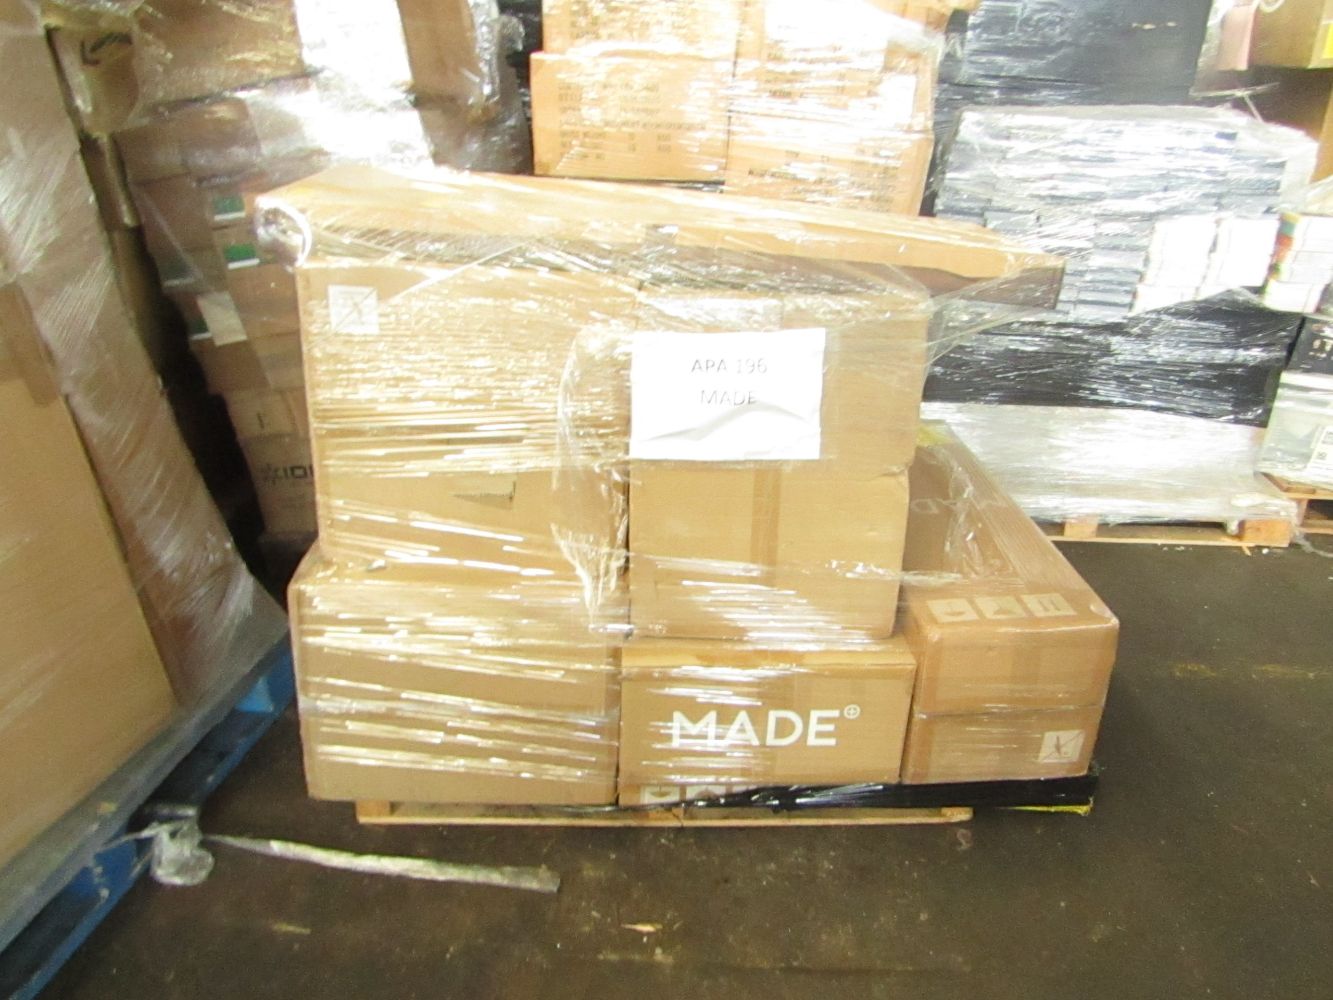 Pallets Of Unworked Made.com Customer Returns, New Lower Reserves for a limited time.